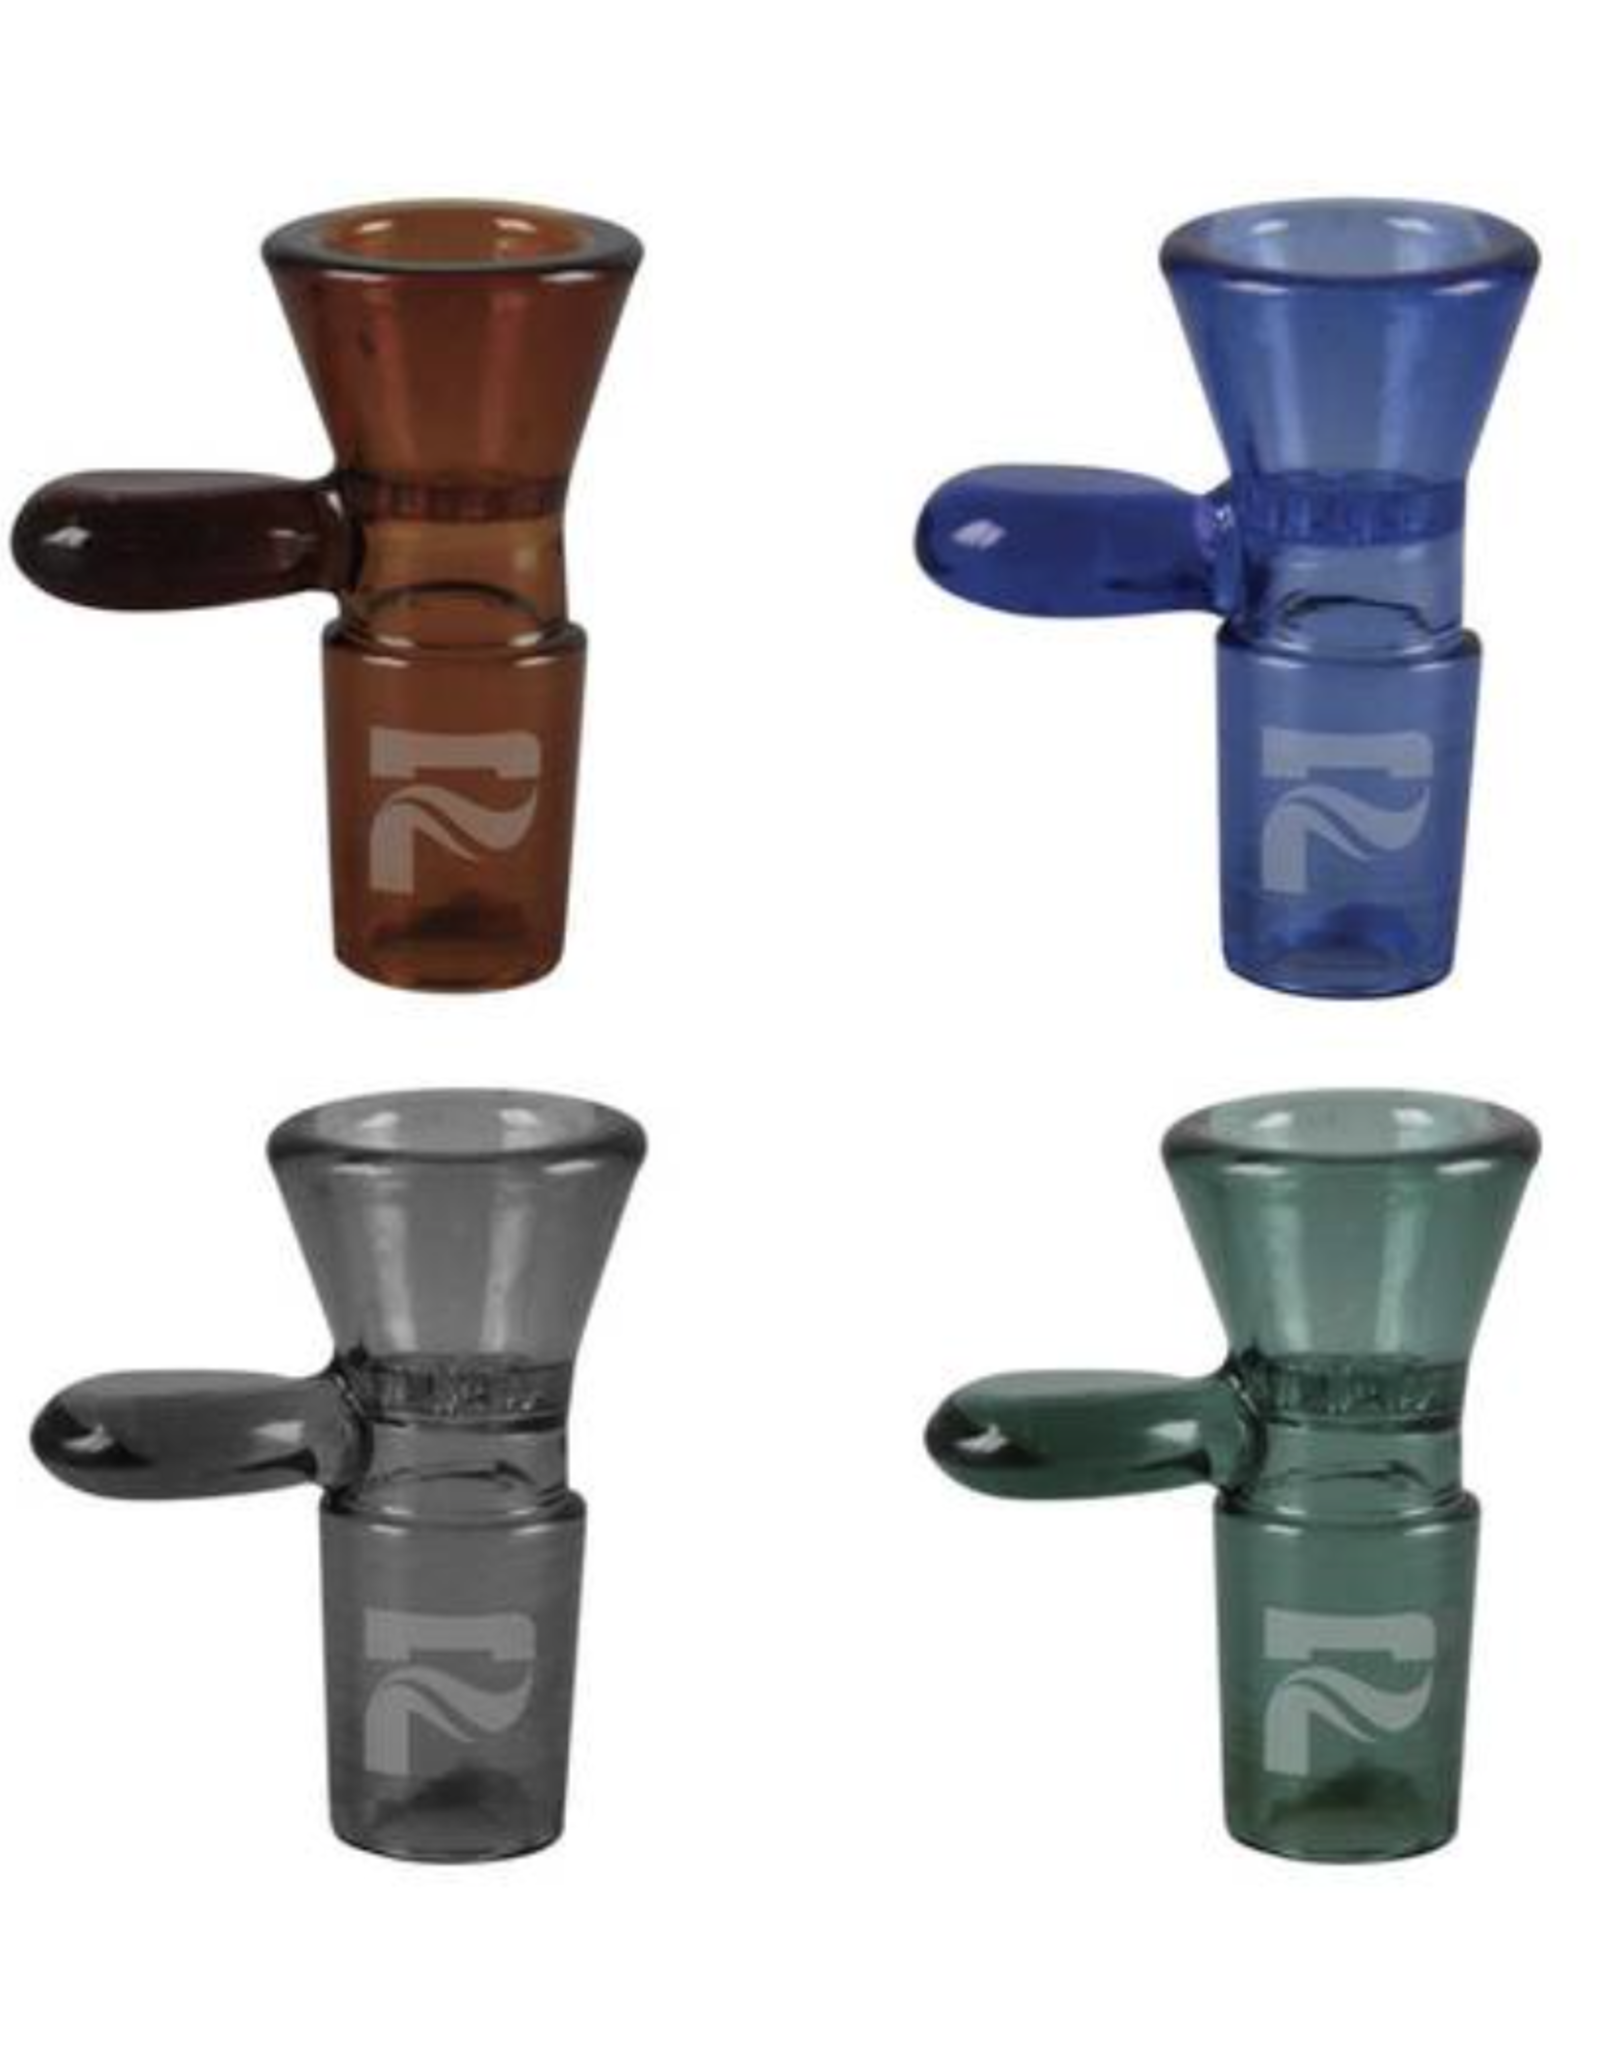 Pulsar 19mm Male Full Colour Cone Bowl by Pulsar